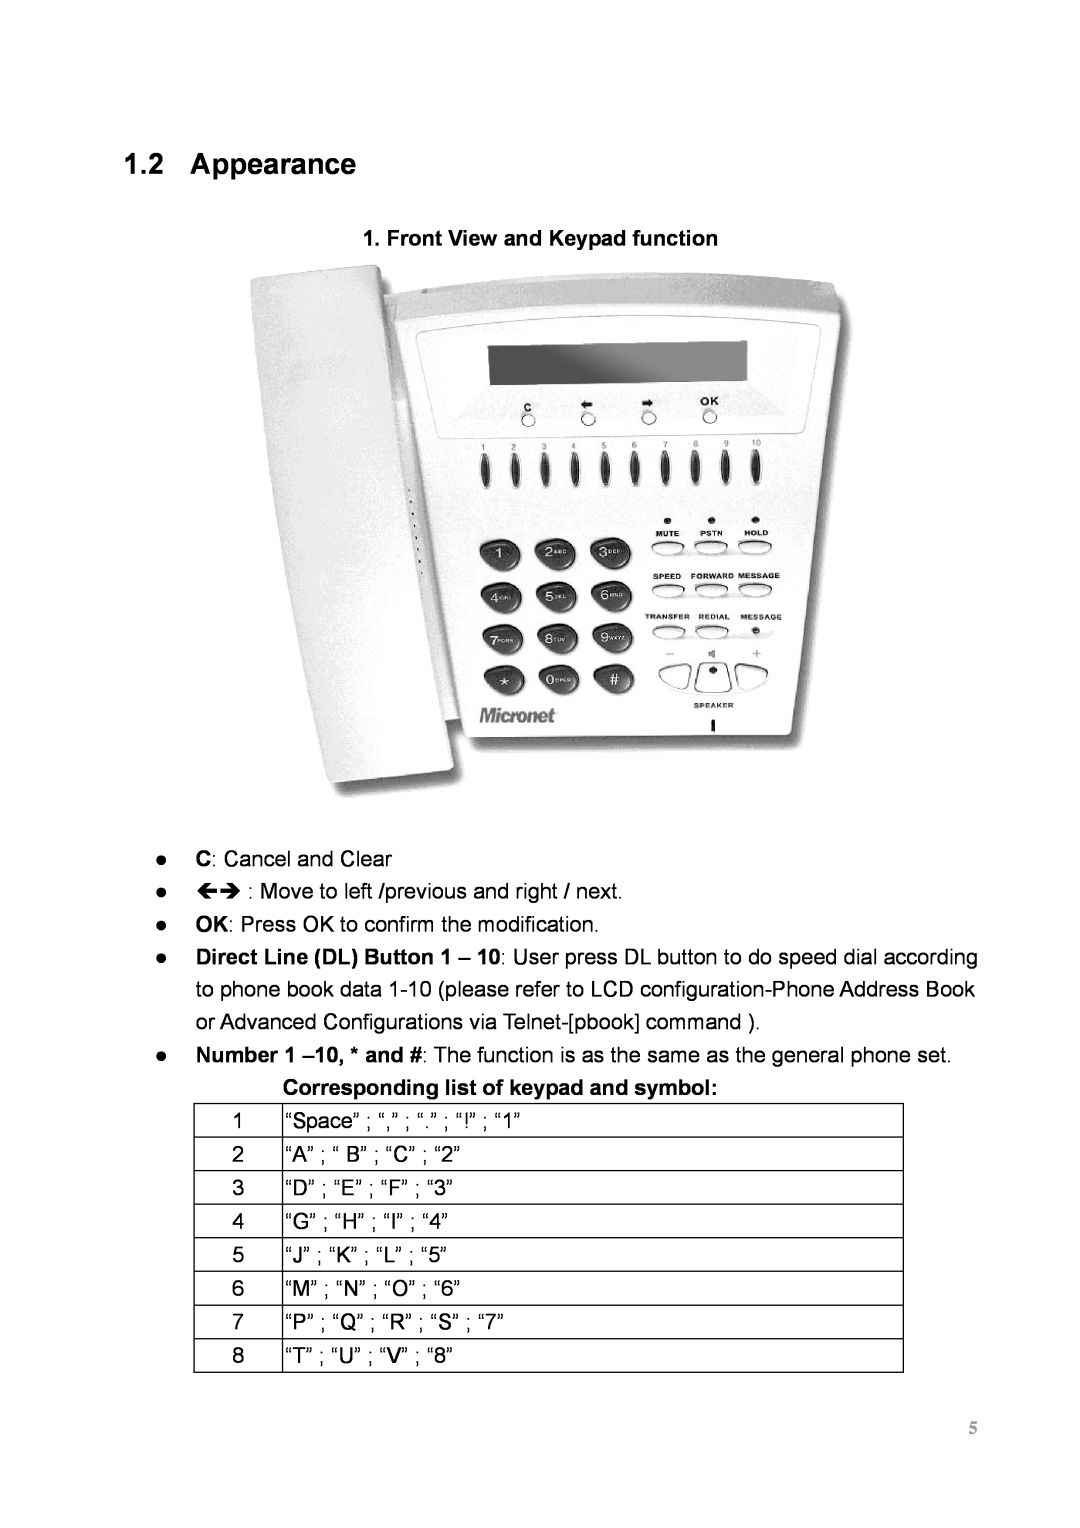 MicroNet Technology SP5100 user manual Appearance, Front View and Keypad function, Corresponding list of keypad and symbol 